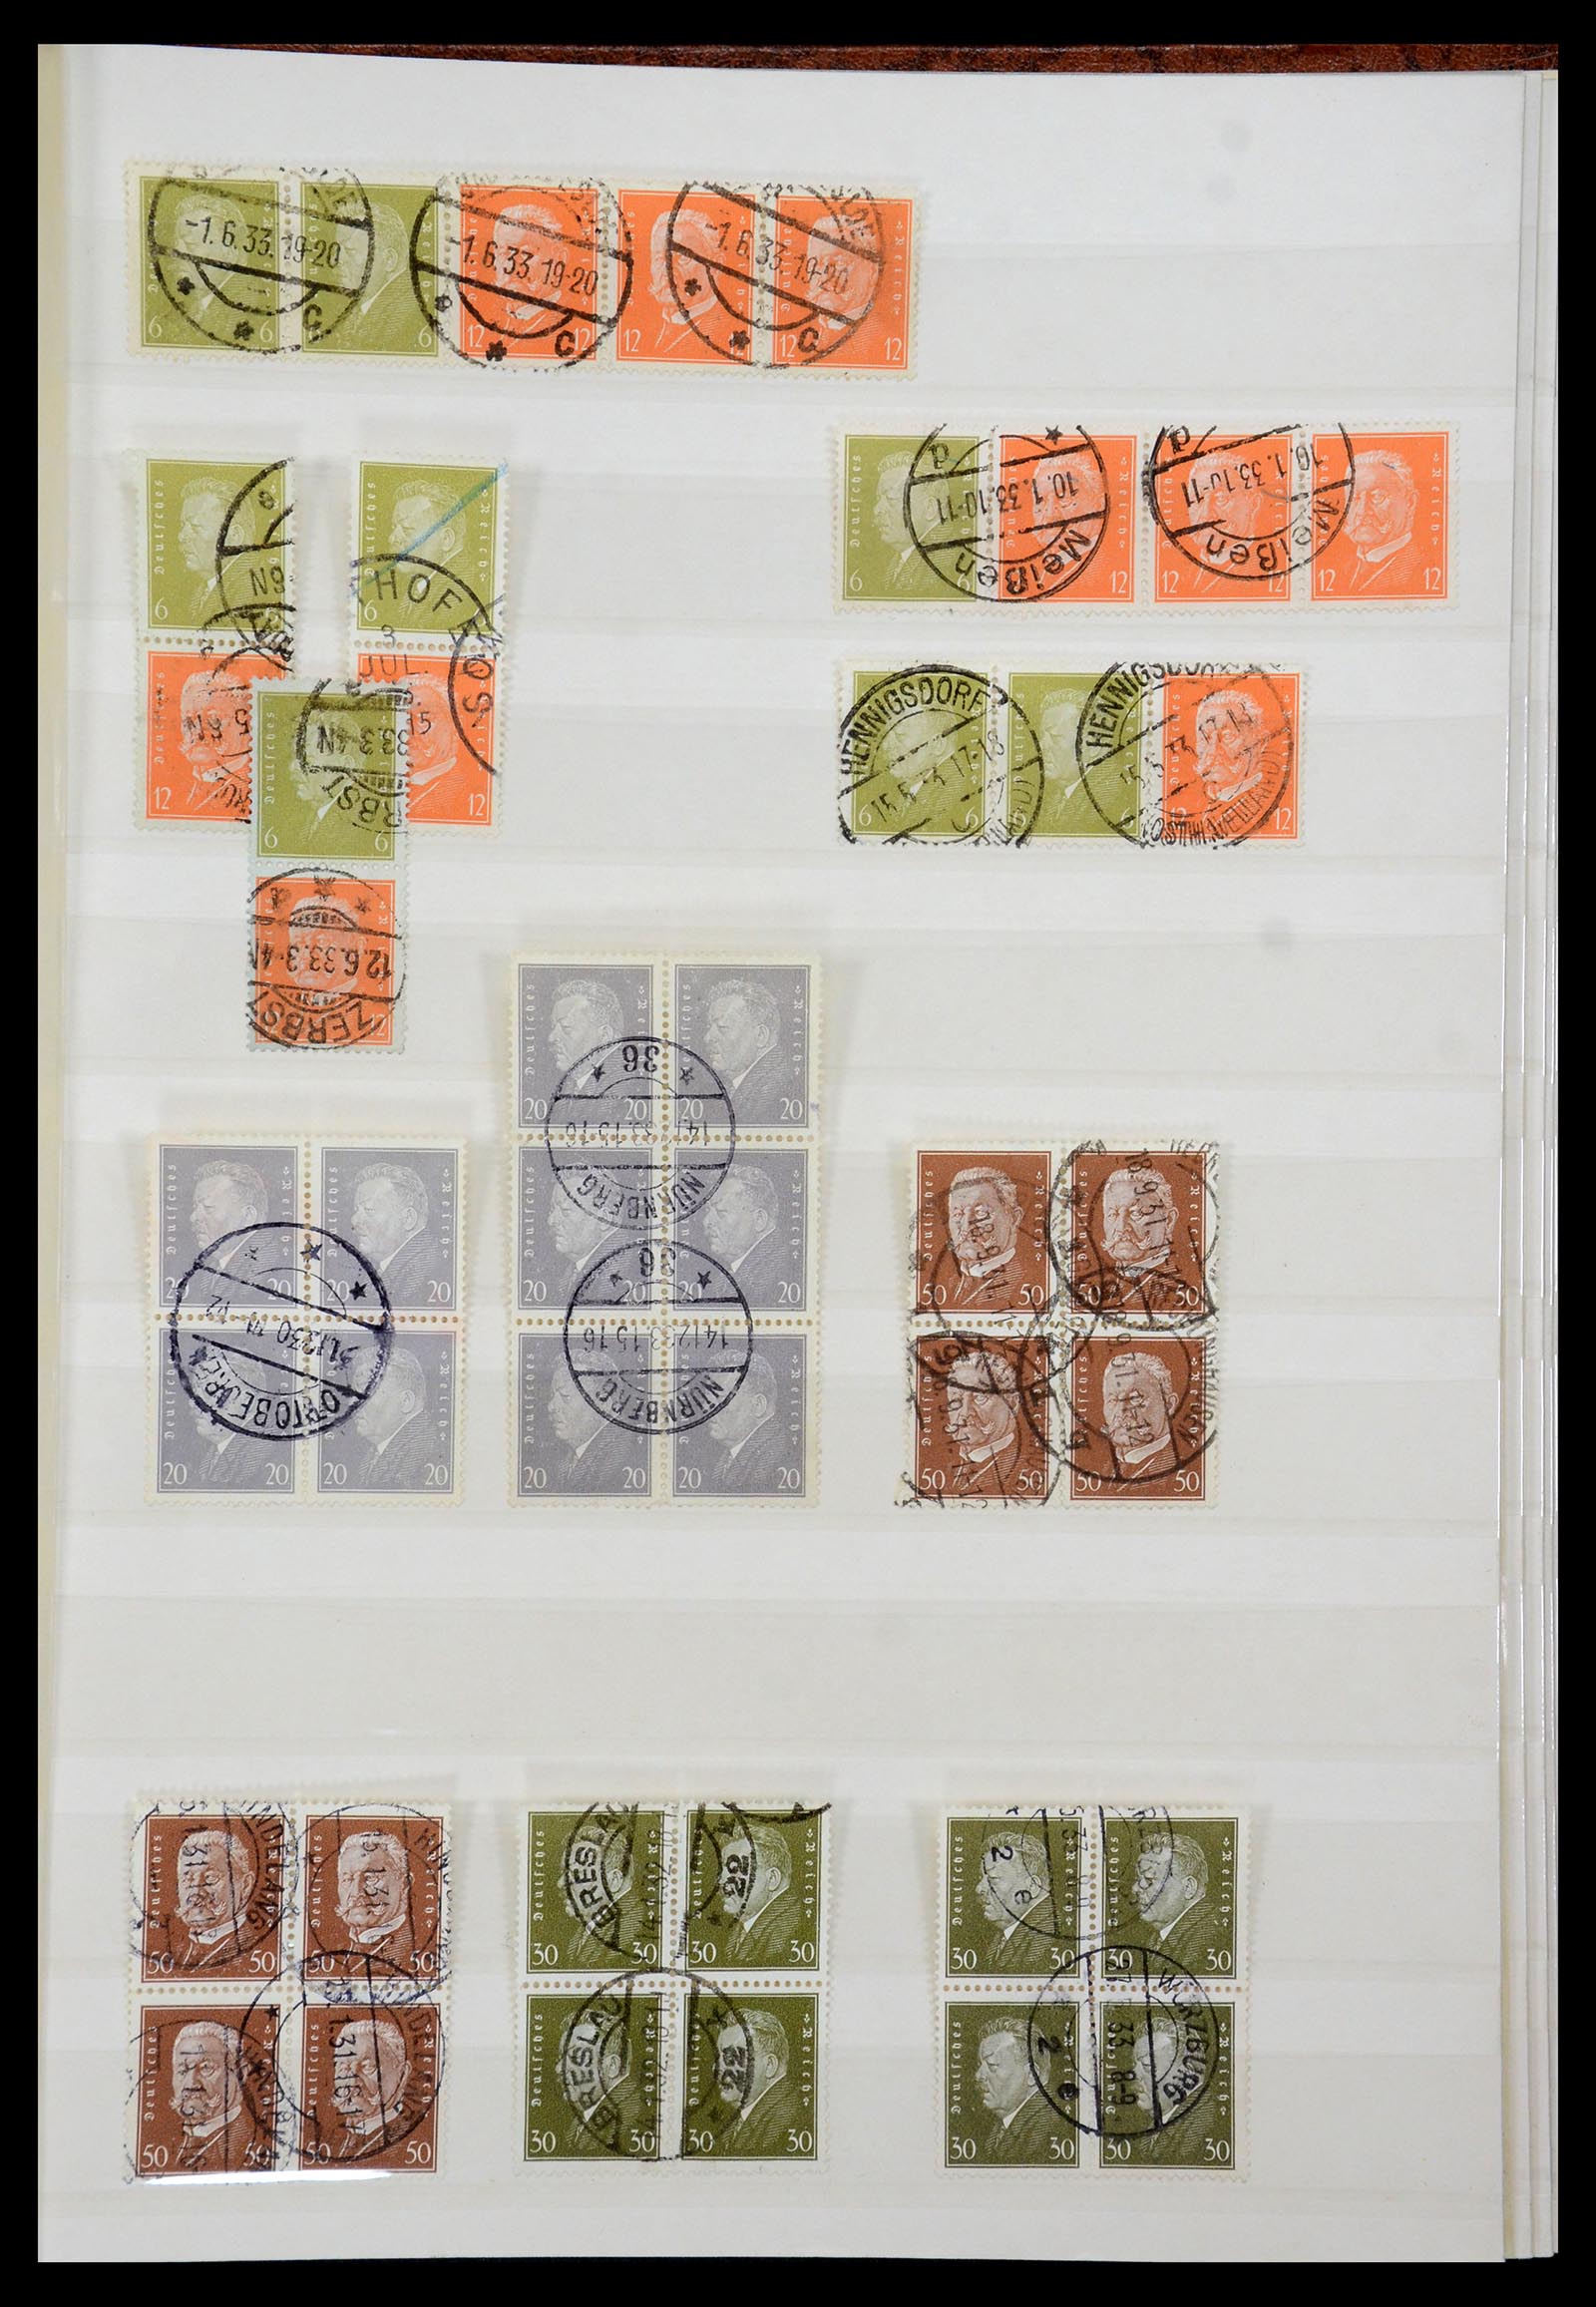 35530 017 - Stamp Collection 35530 German Reich 1872-1944 canceled.